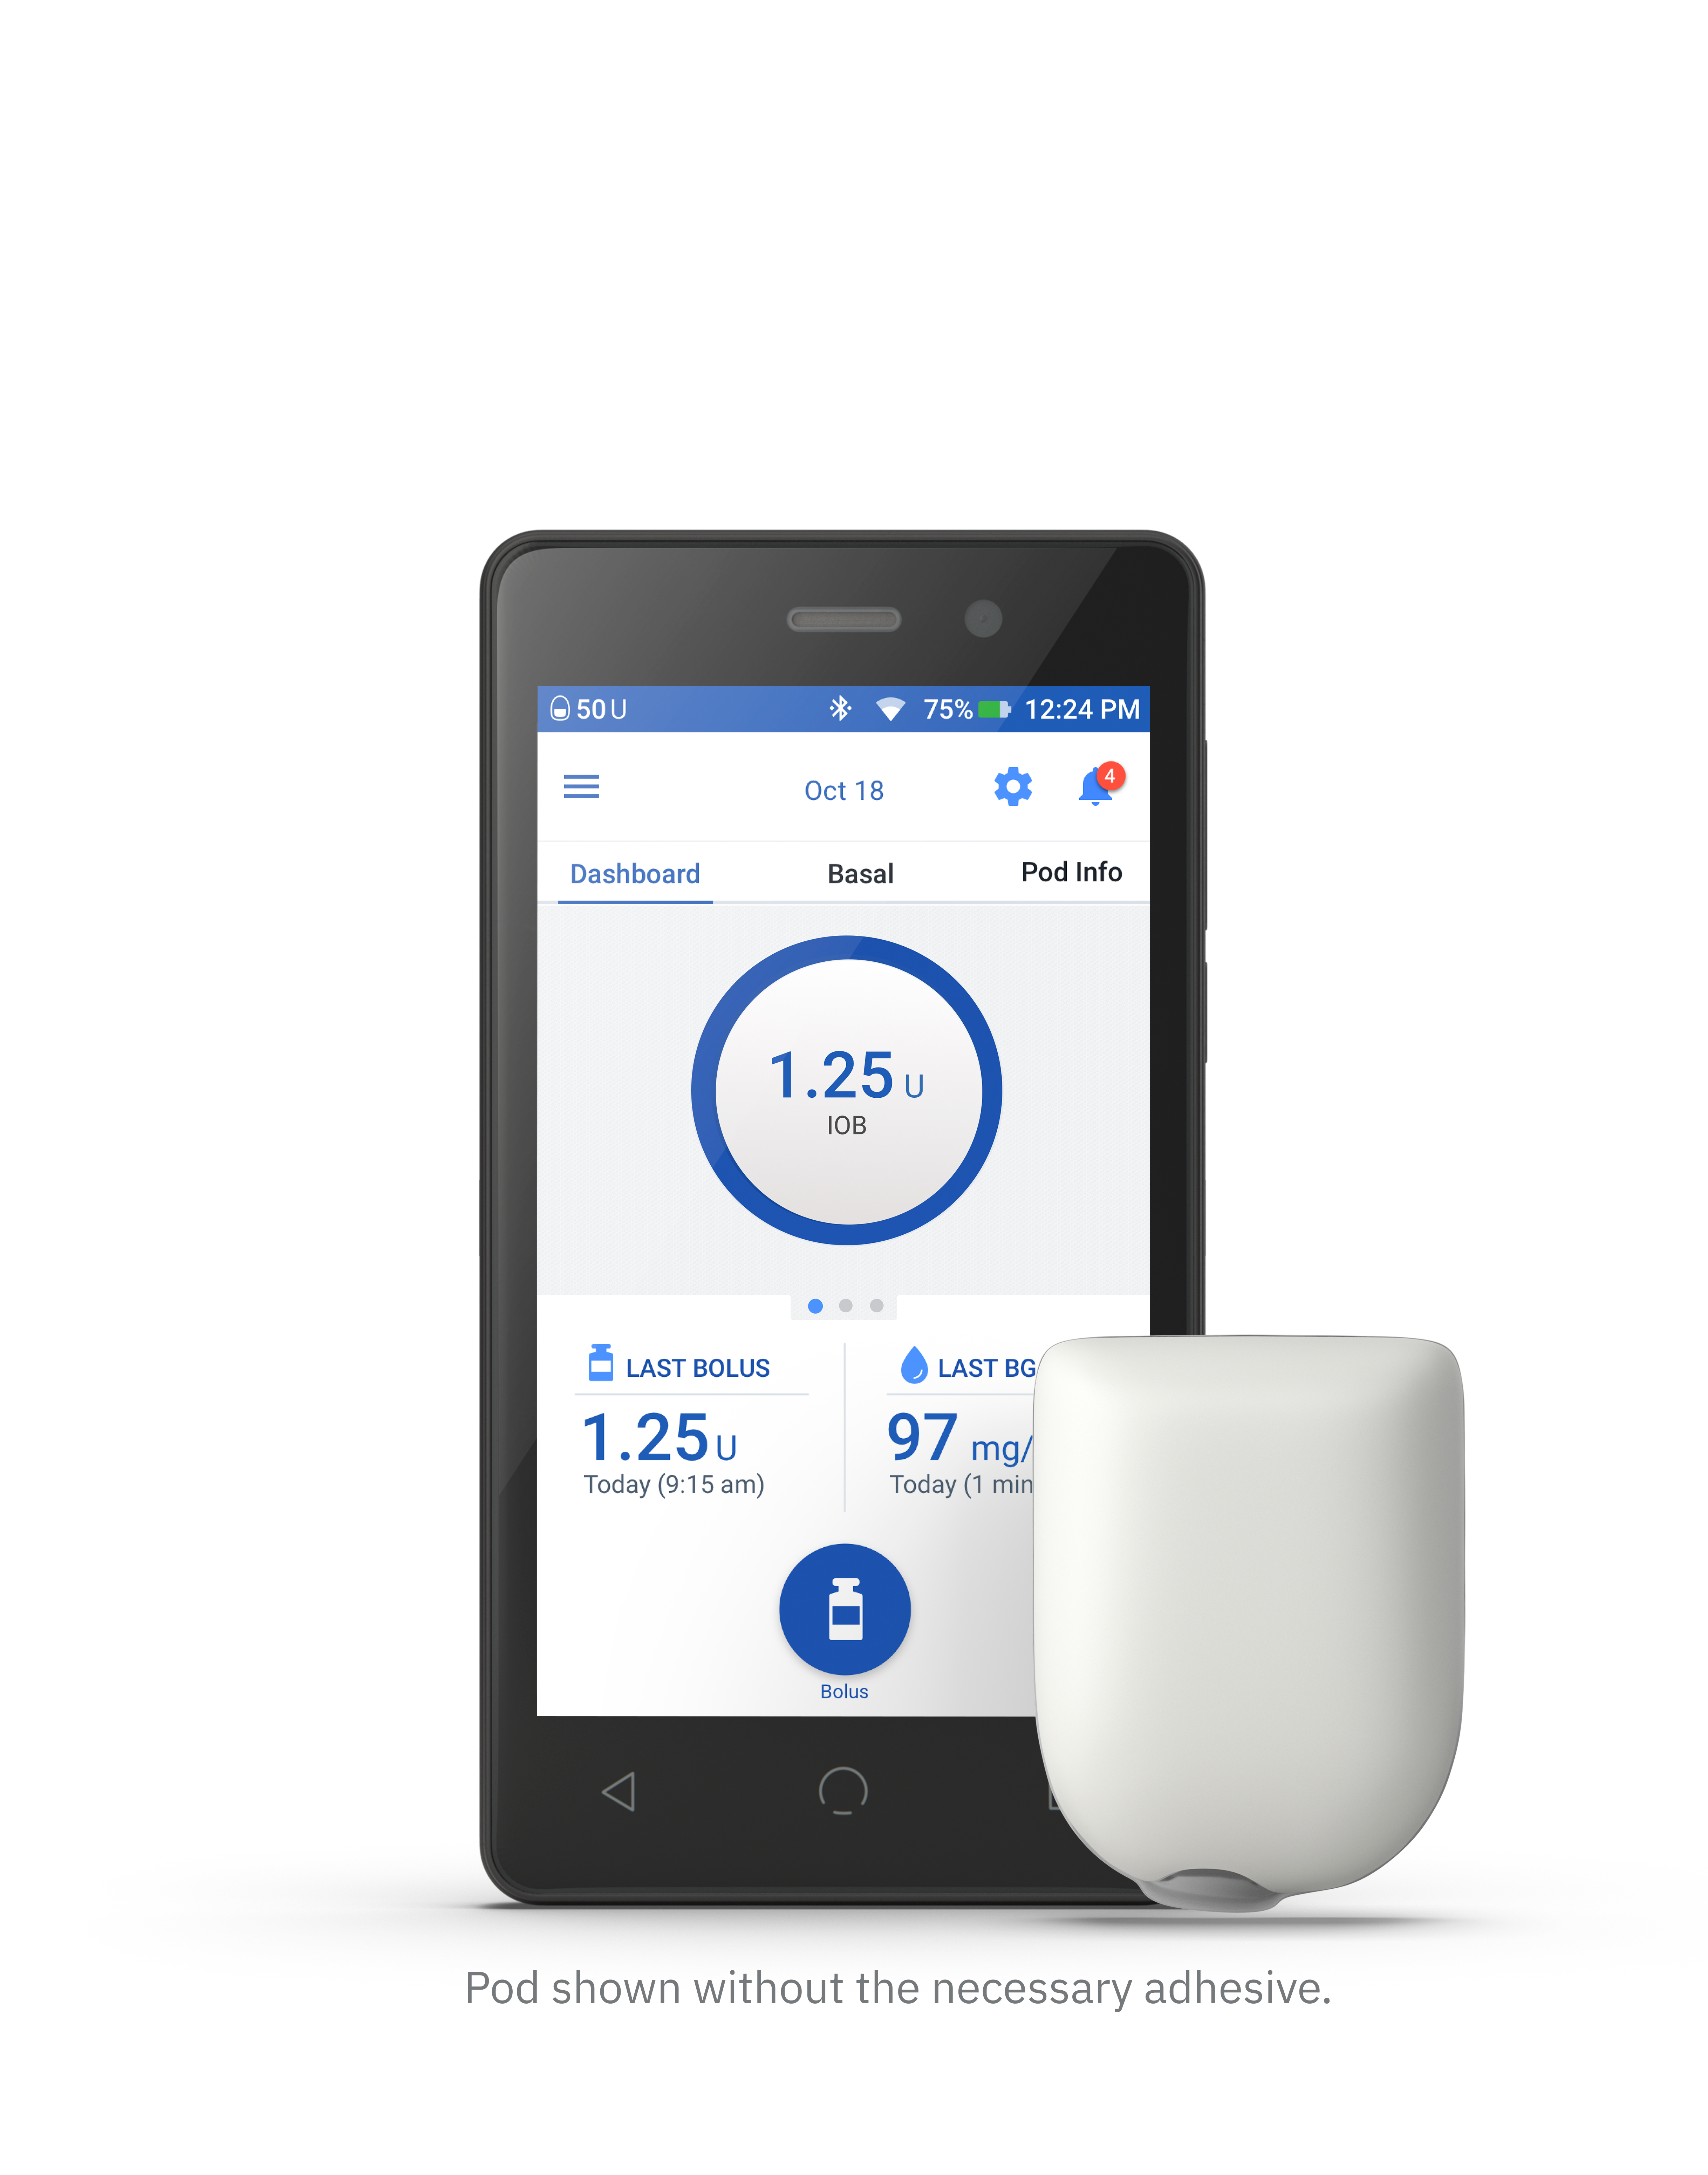 The Insulin Pump (omnipod) is a widely used medical treatment during the 2020s.